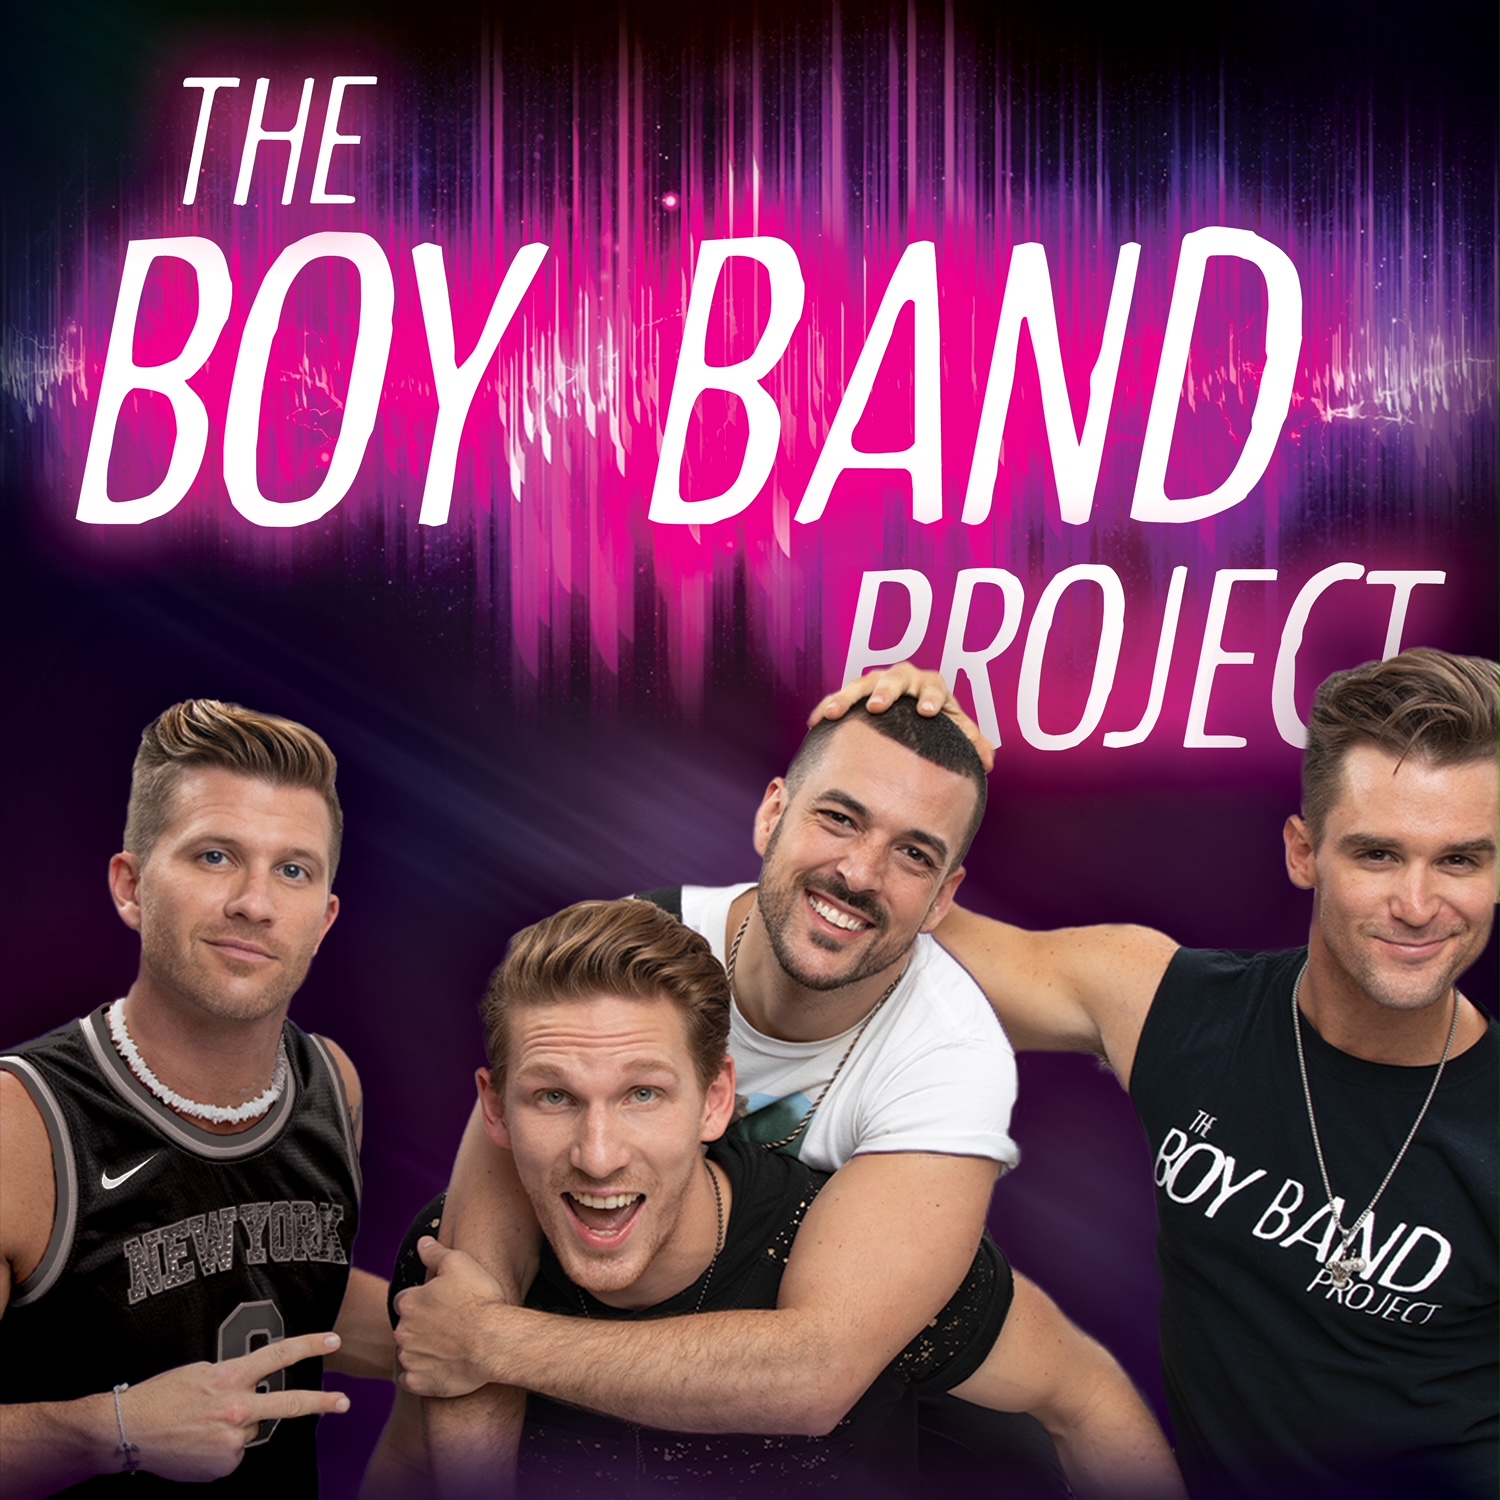 THE BOY BAND PROJECT “Embrace your Boy Band Fantasy” Villa Roma Resort